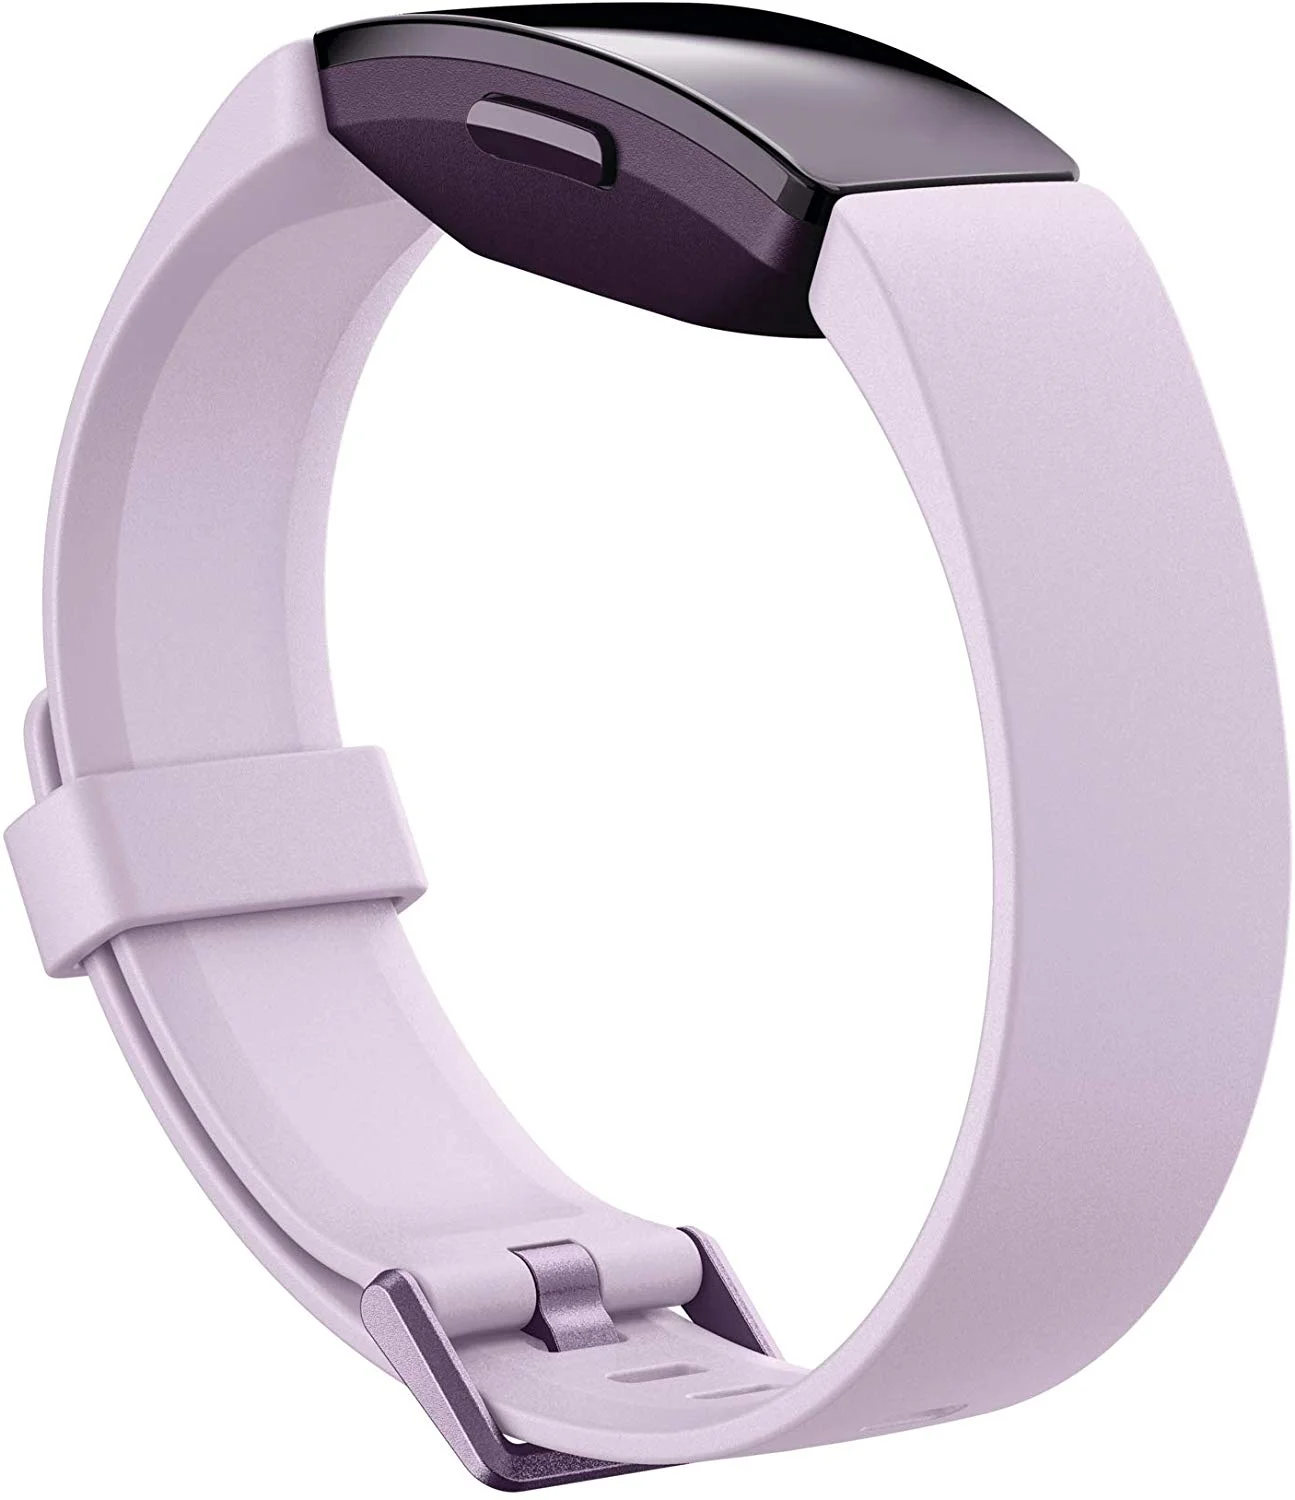 Fitbit Inspire HR Specifications and features